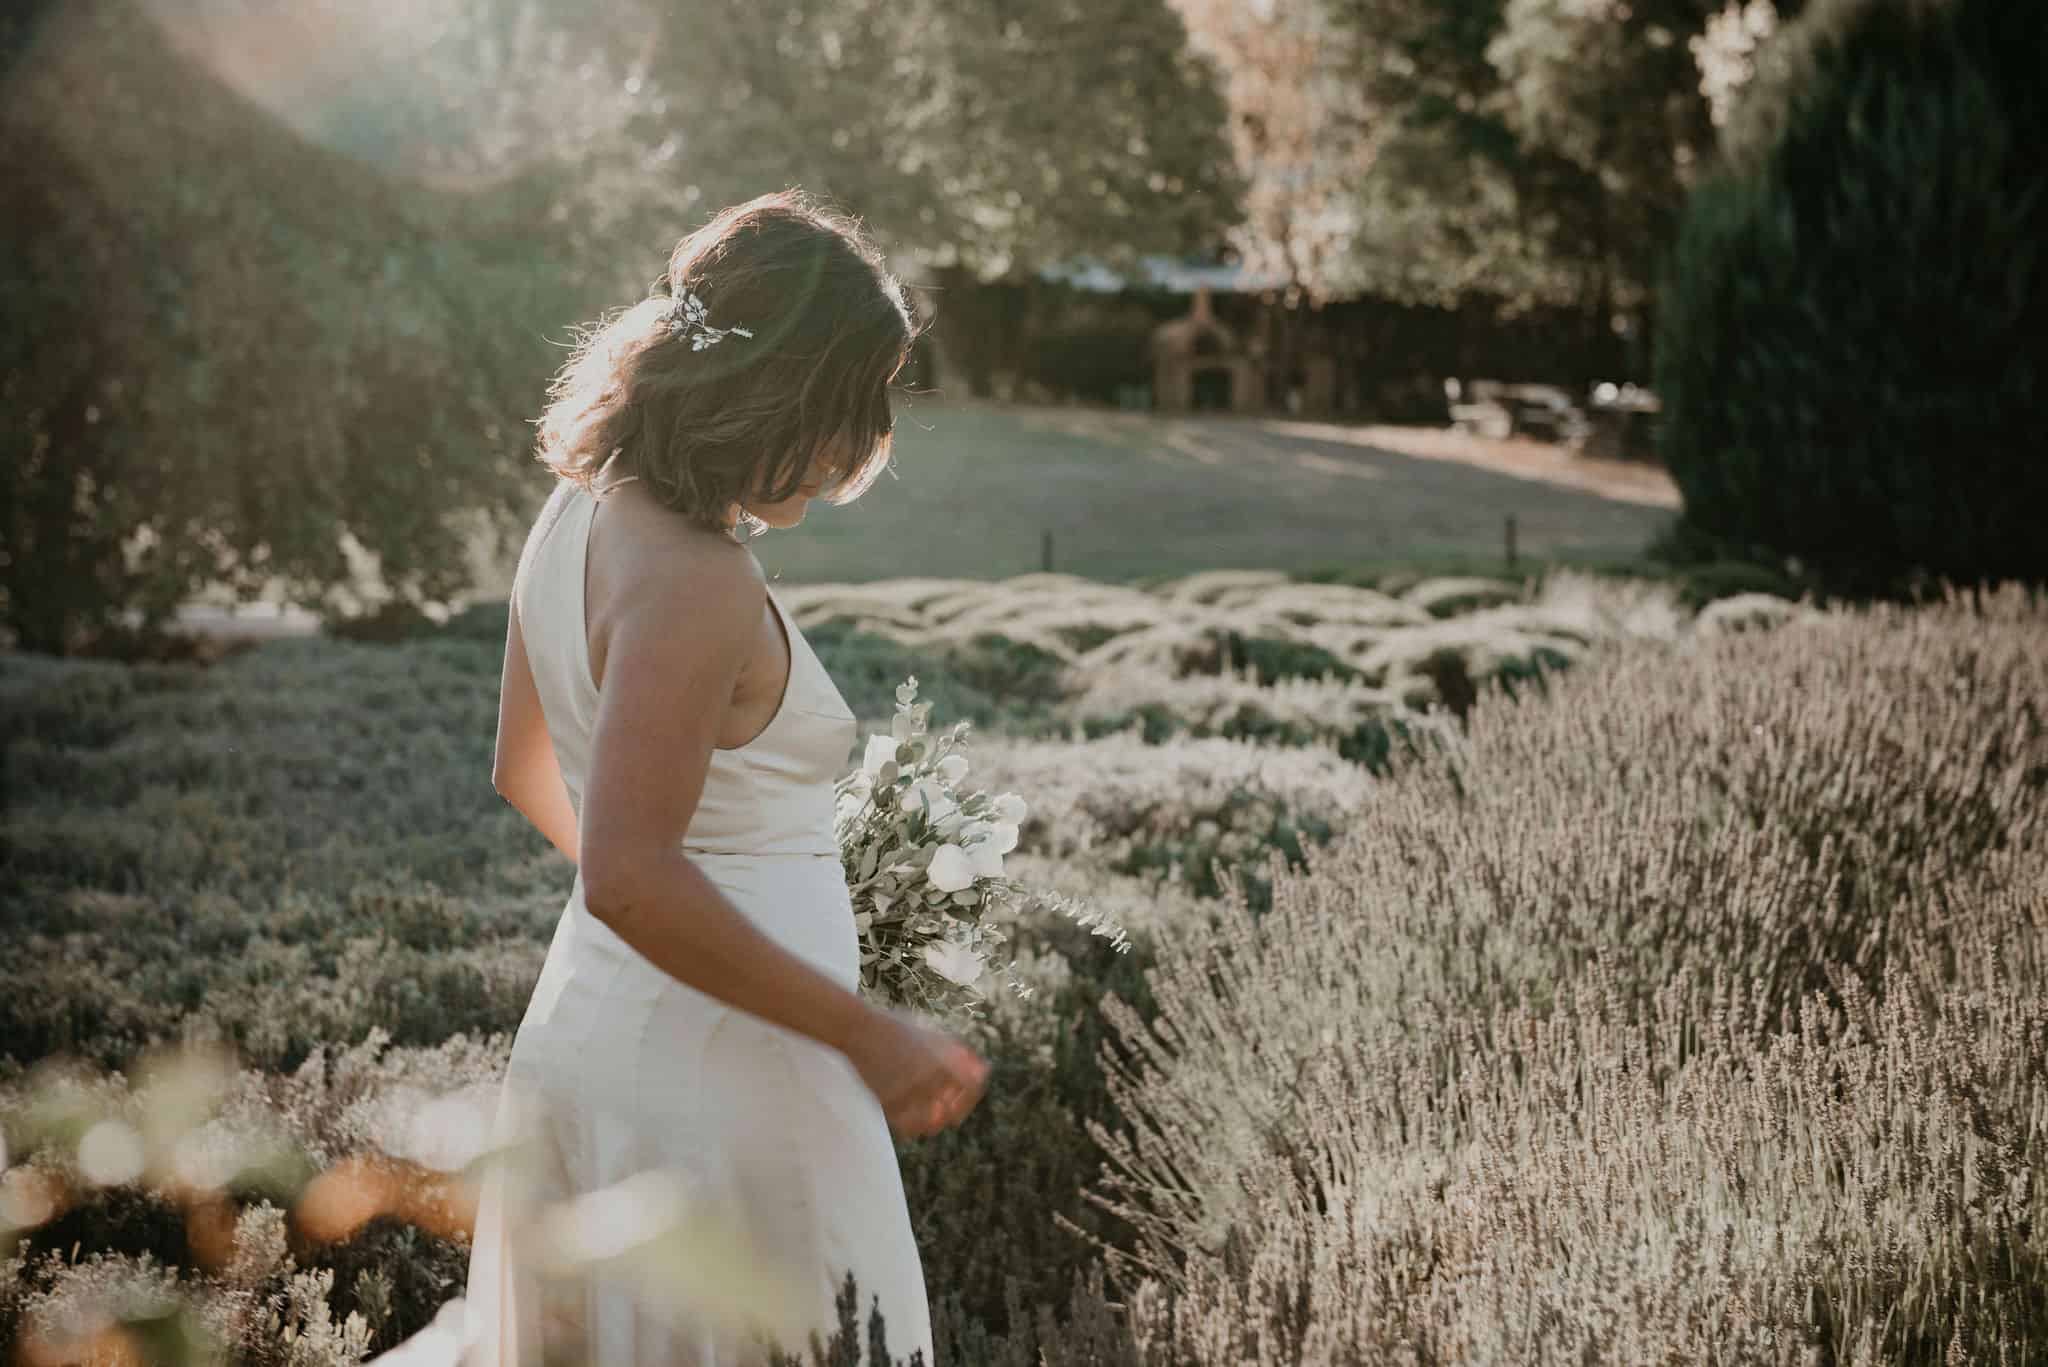 Bride walks through lavender in afternoon sunshine at Lavandula Swiss Italian Farm Daylesford Elopement with Let's Elope Melbourne Celebrant Photographer Elopement Package Victoria Sarah Matler Photography Macedon Ranges intimate wedding ceremony